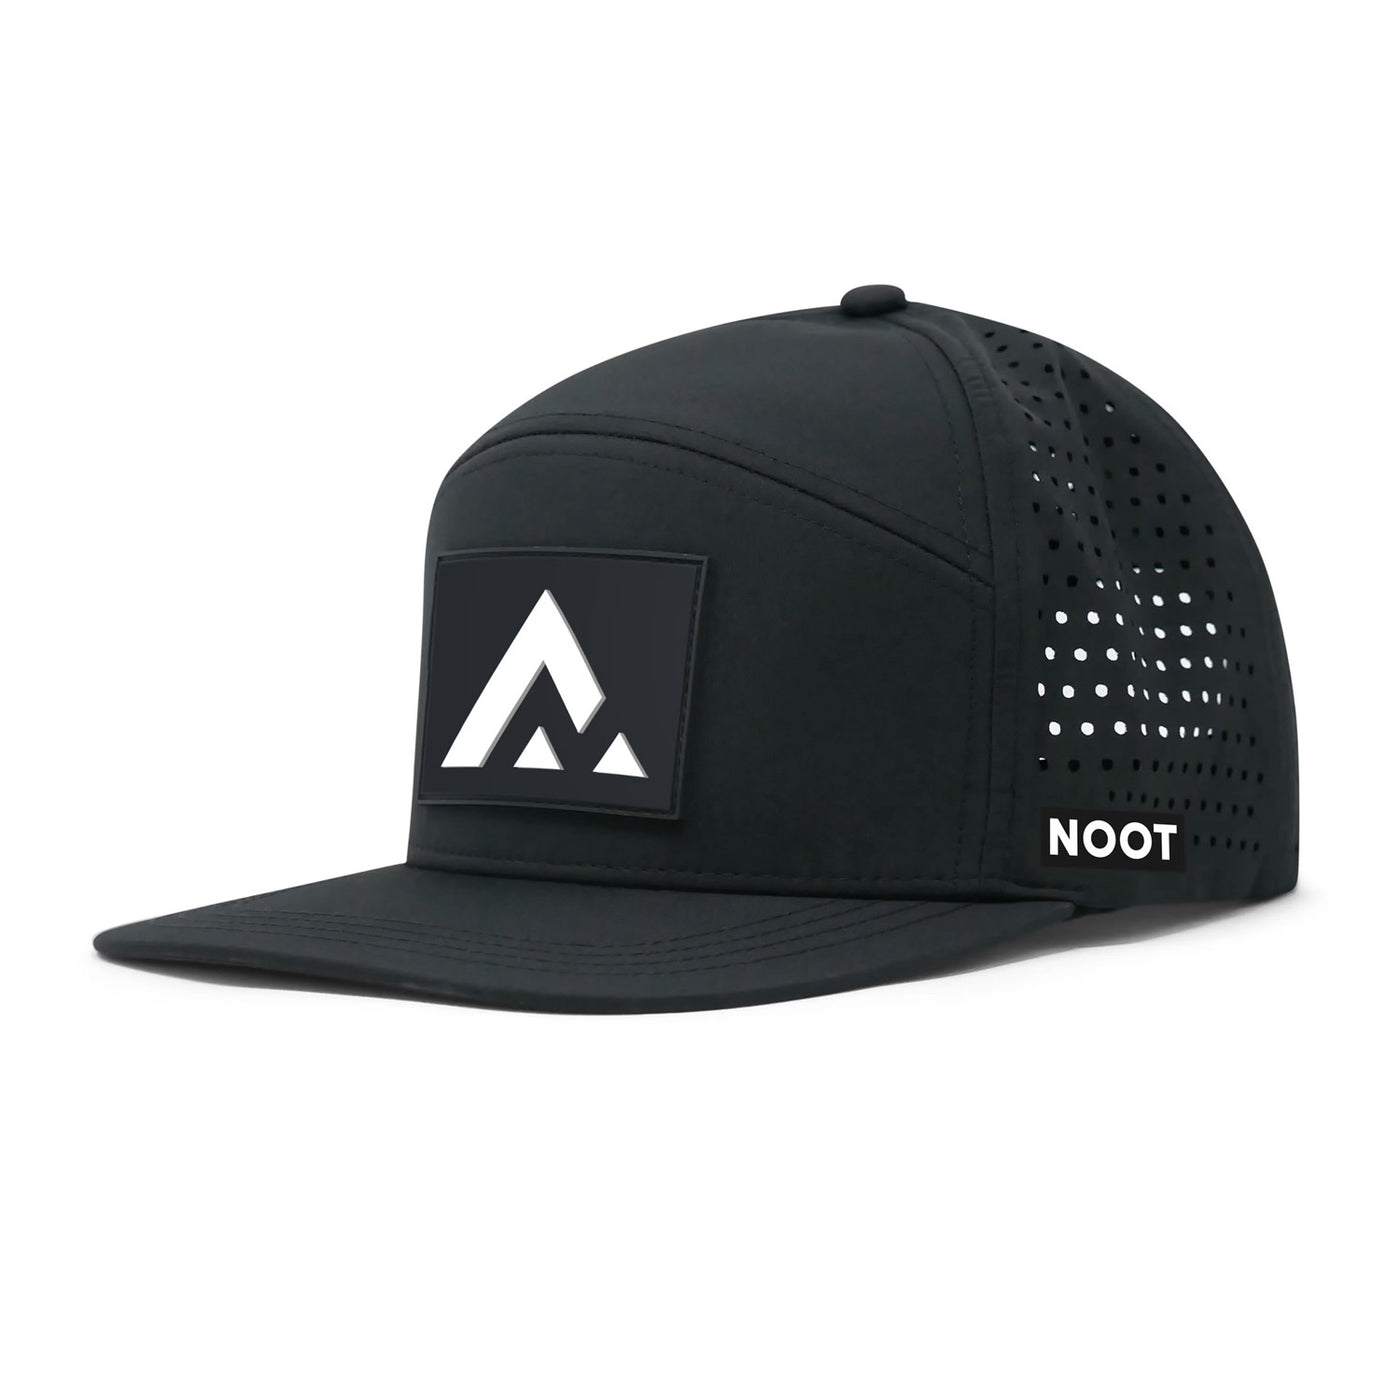 Exclusive Nootricious Cap: Limited Edition